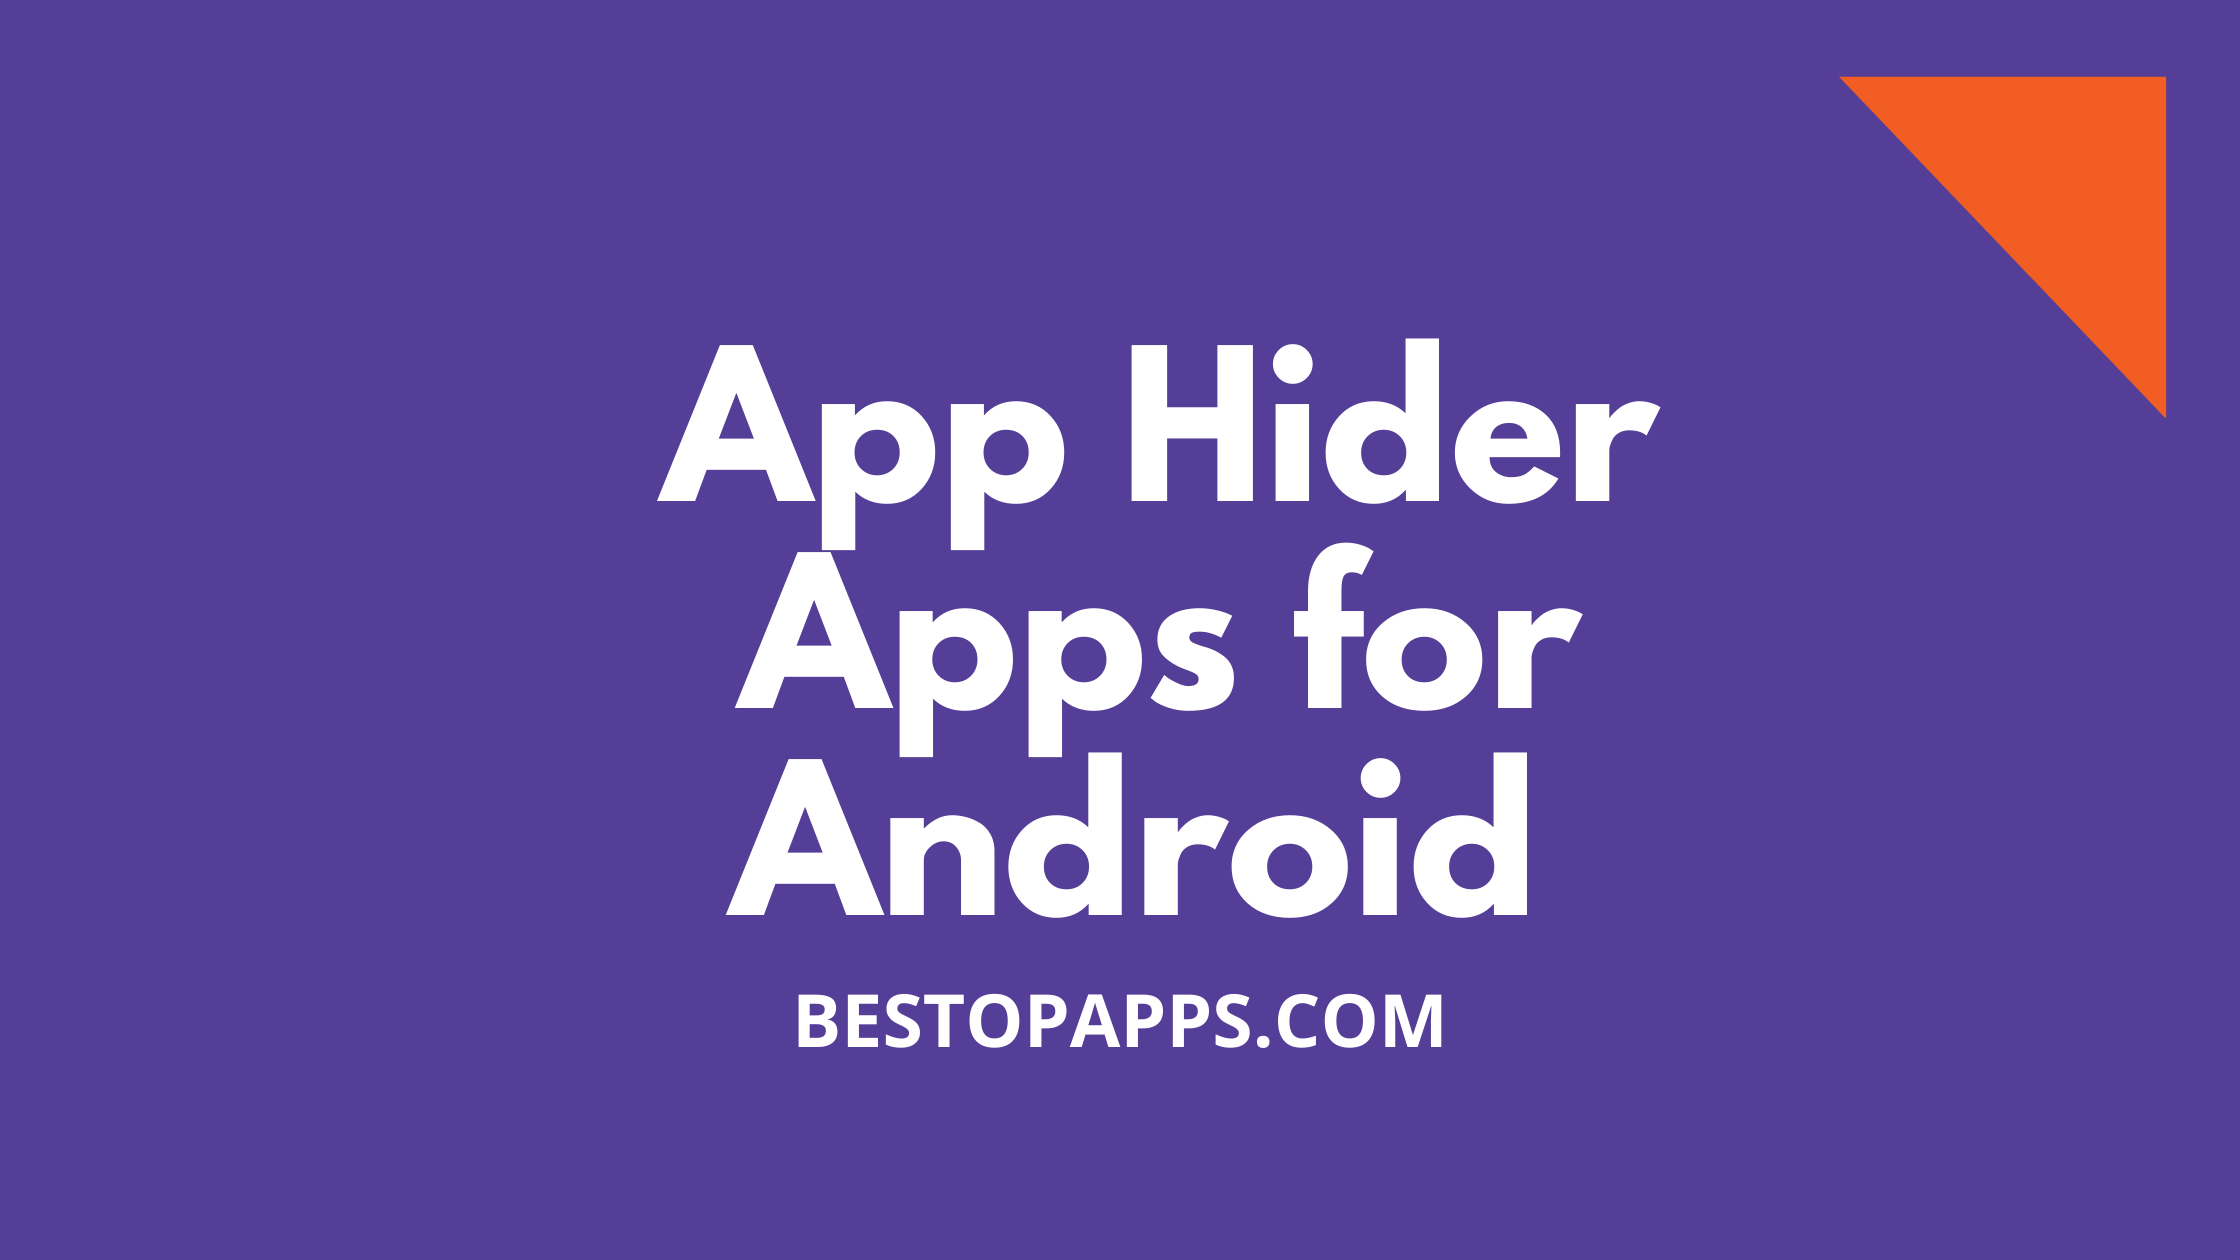 App Hider Apps for Android